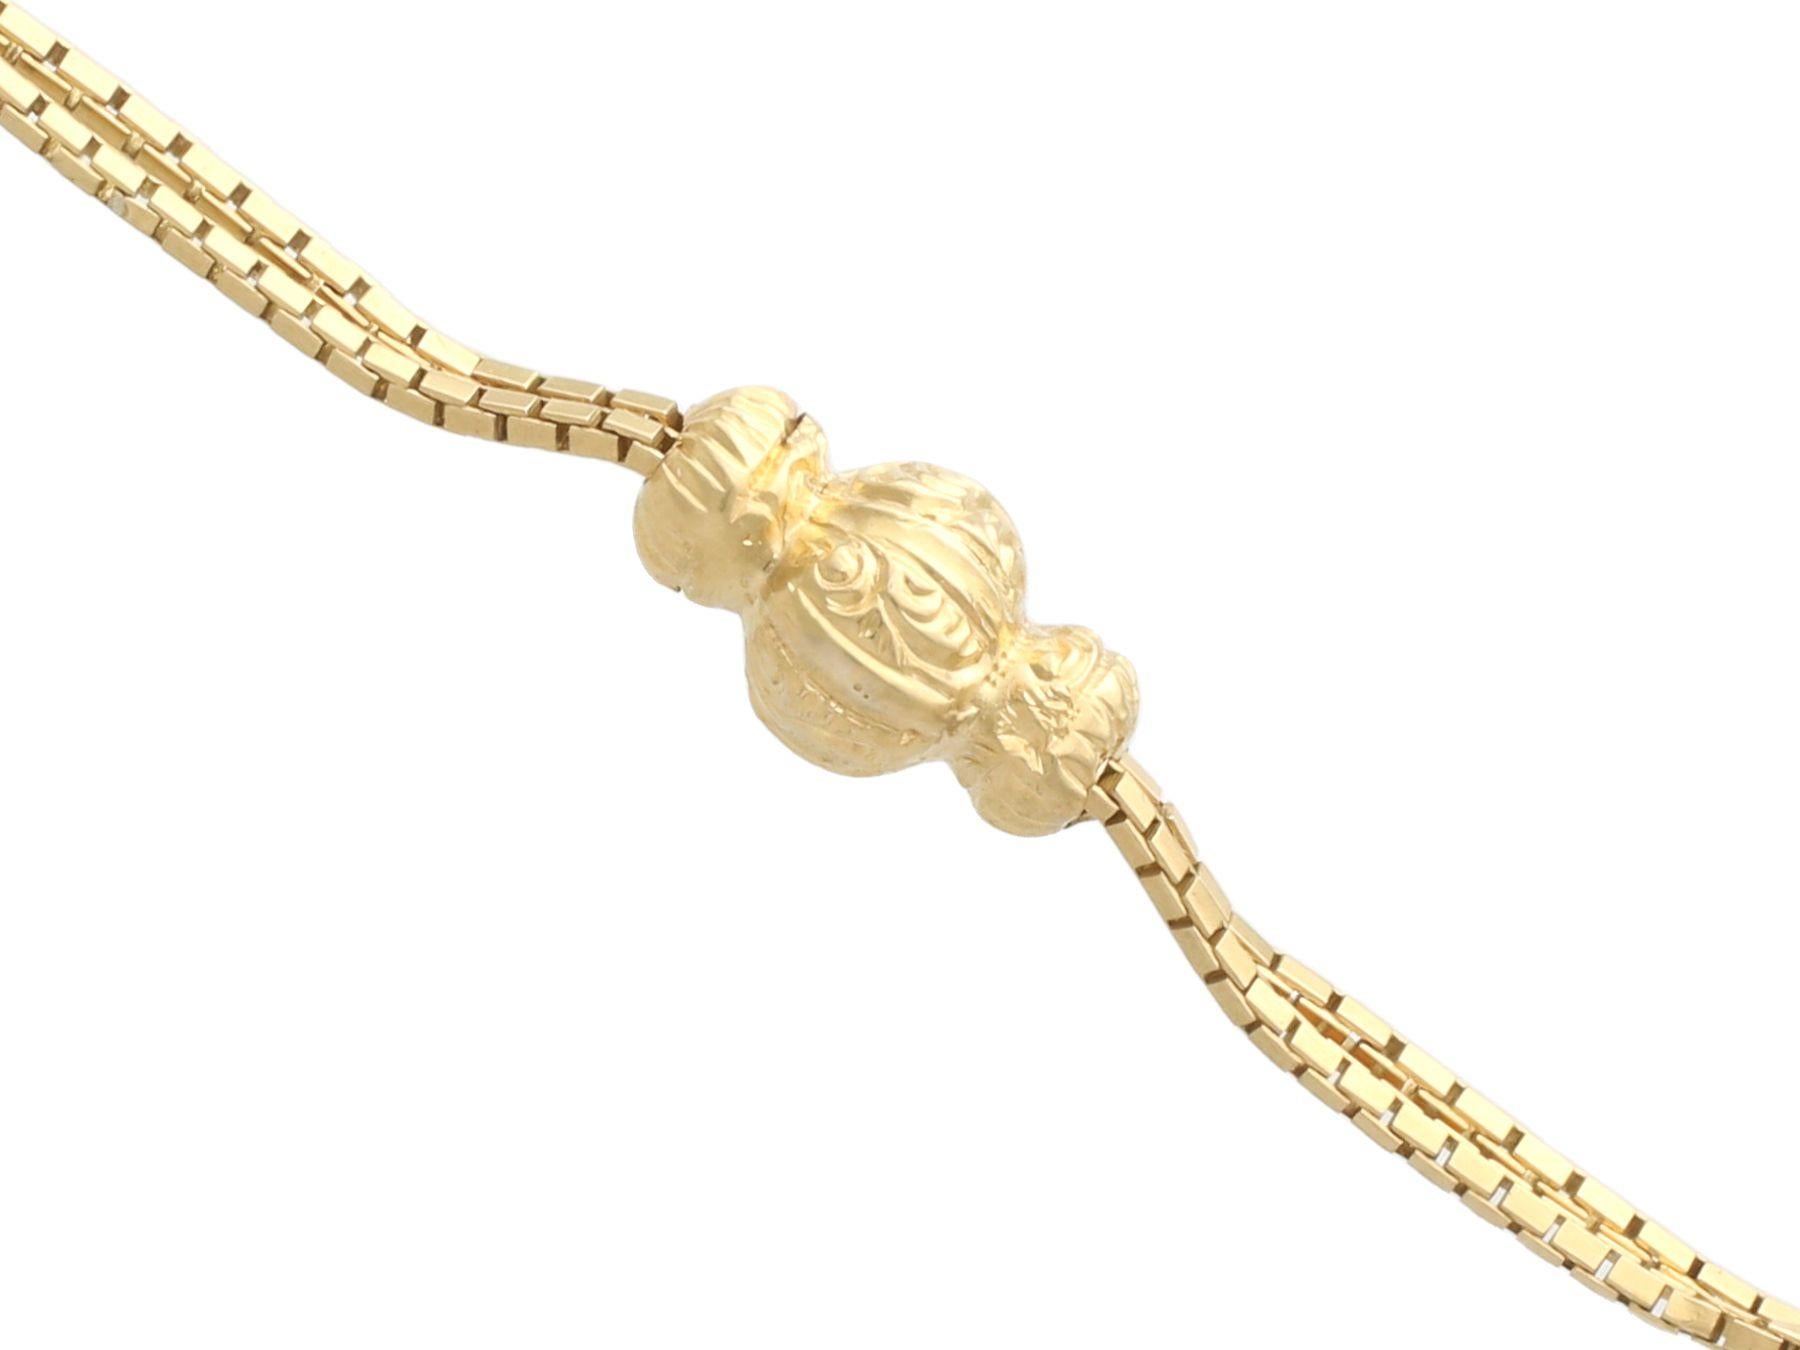 Antique French Yellow Gold Sautoir Chain, Circa 1870 In Excellent Condition For Sale In Jesmond, Newcastle Upon Tyne